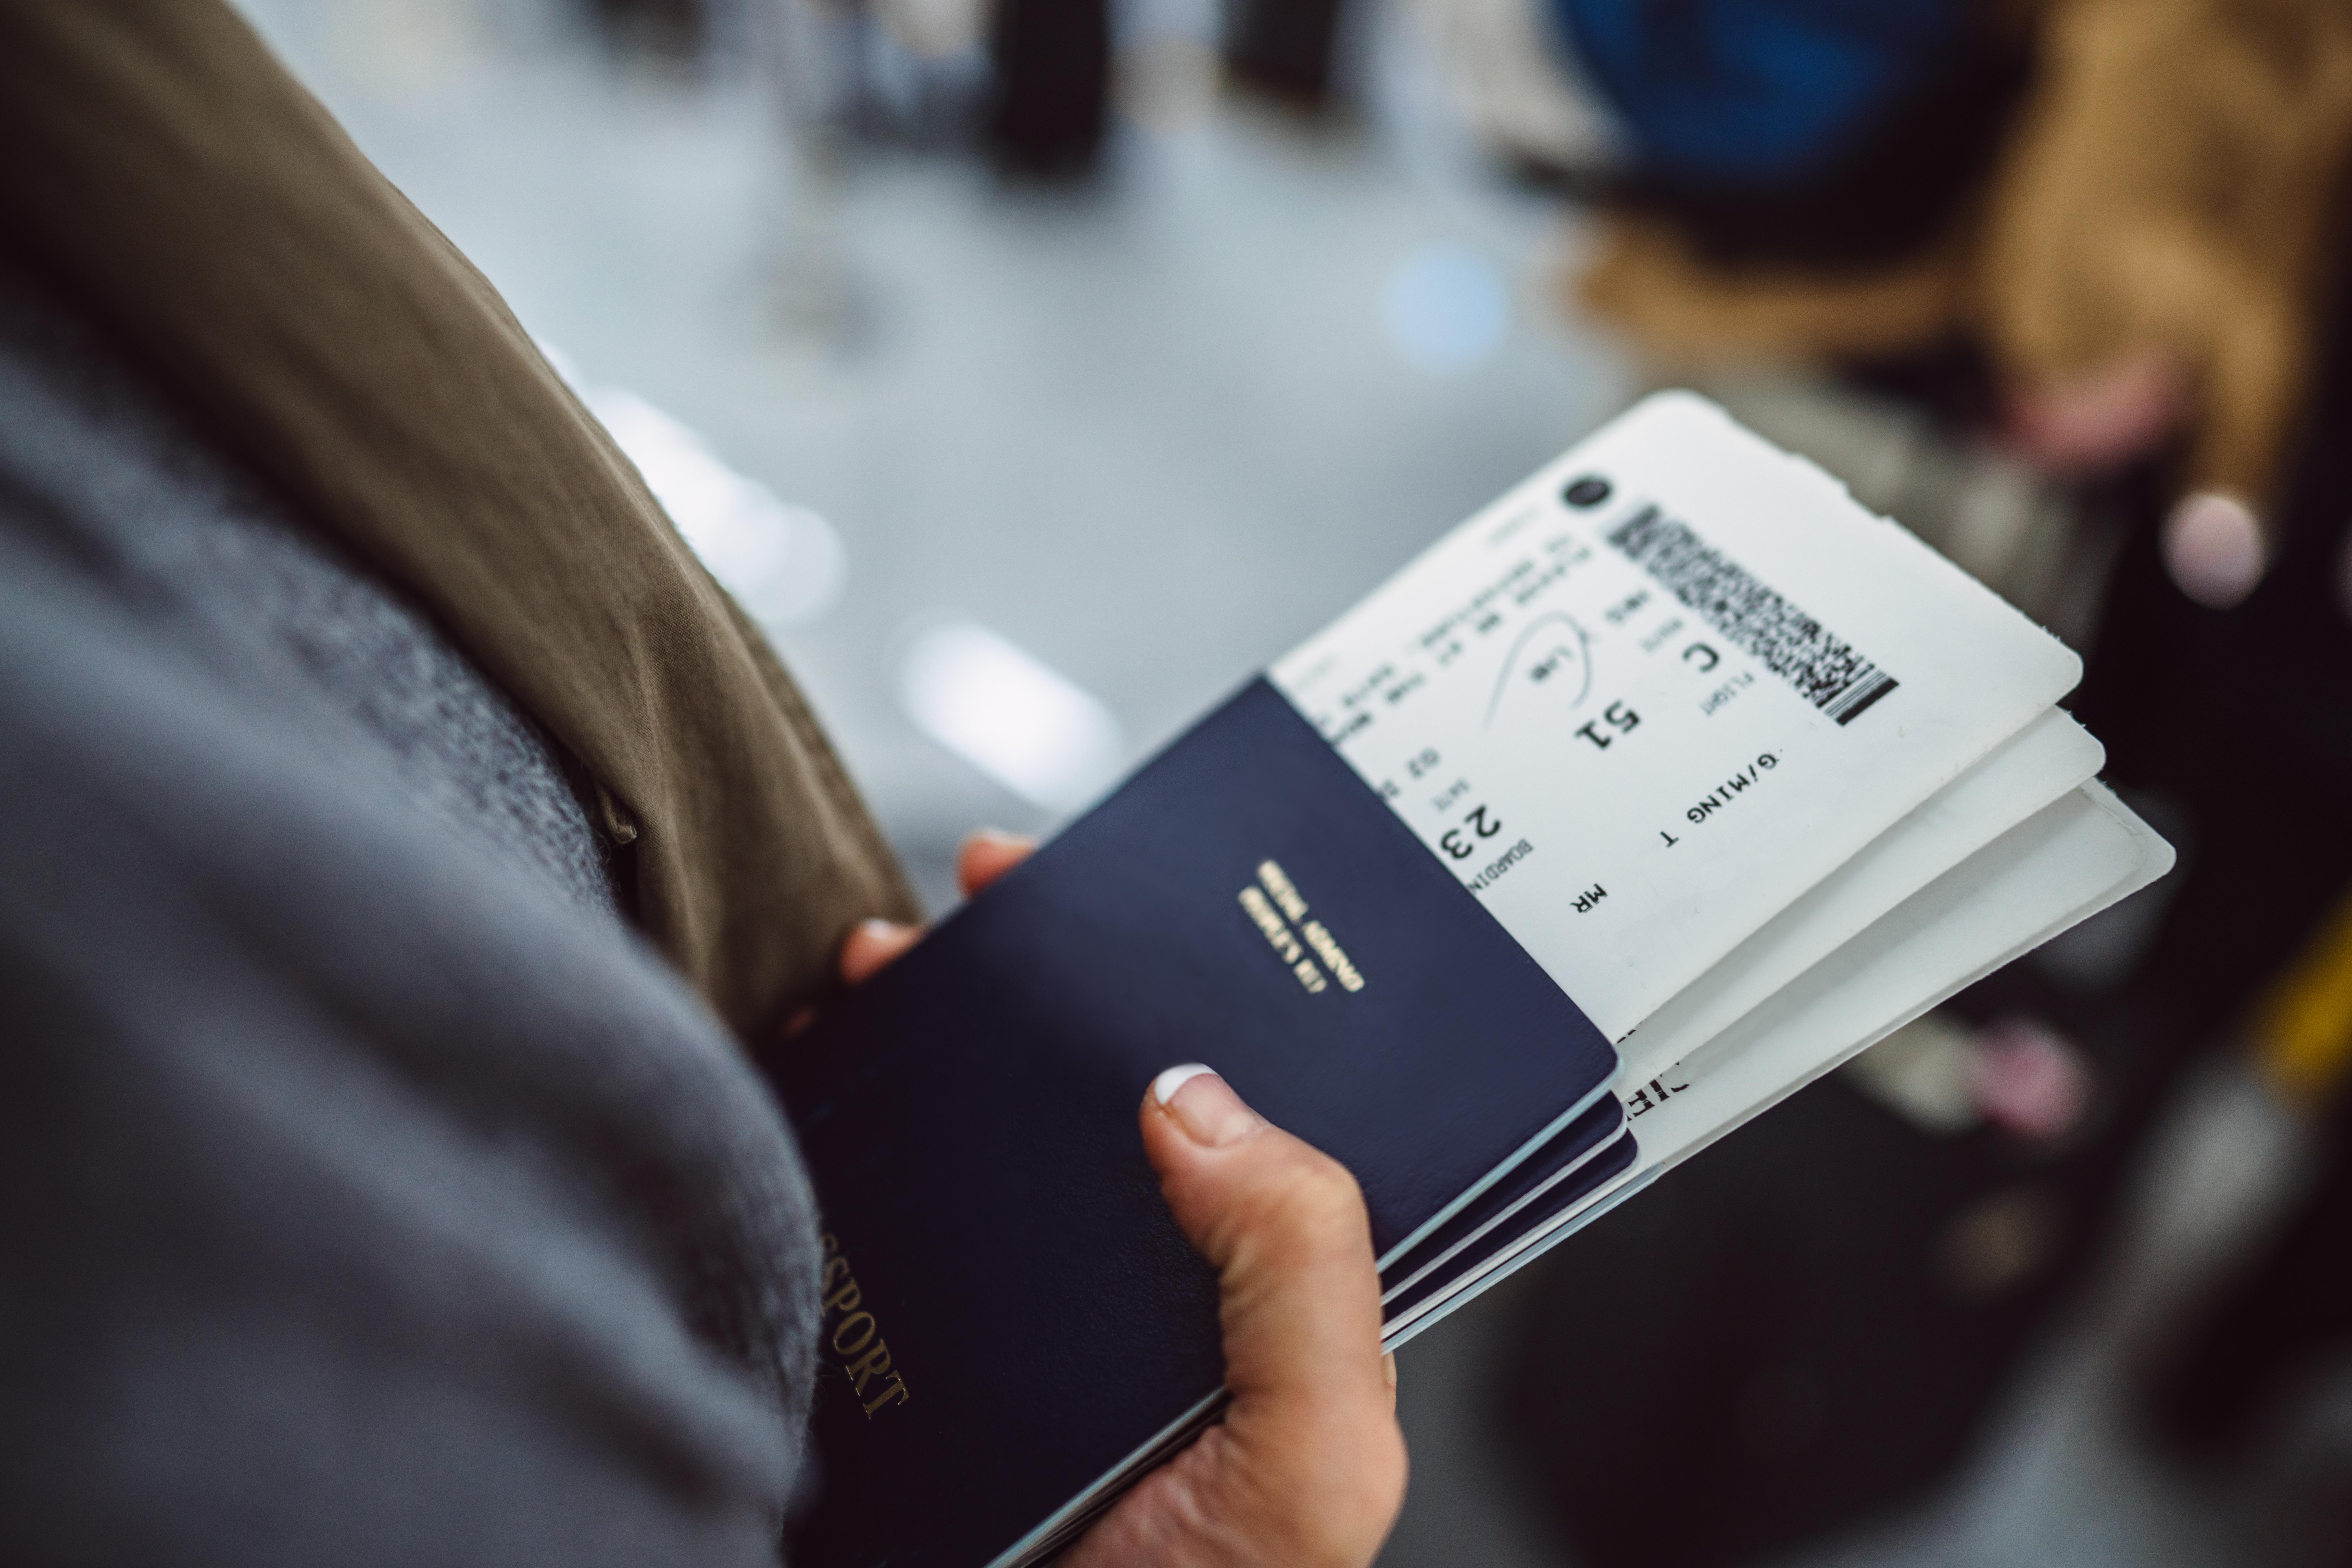 If you misplace your boarding pass you could be charged €20 for a replacement